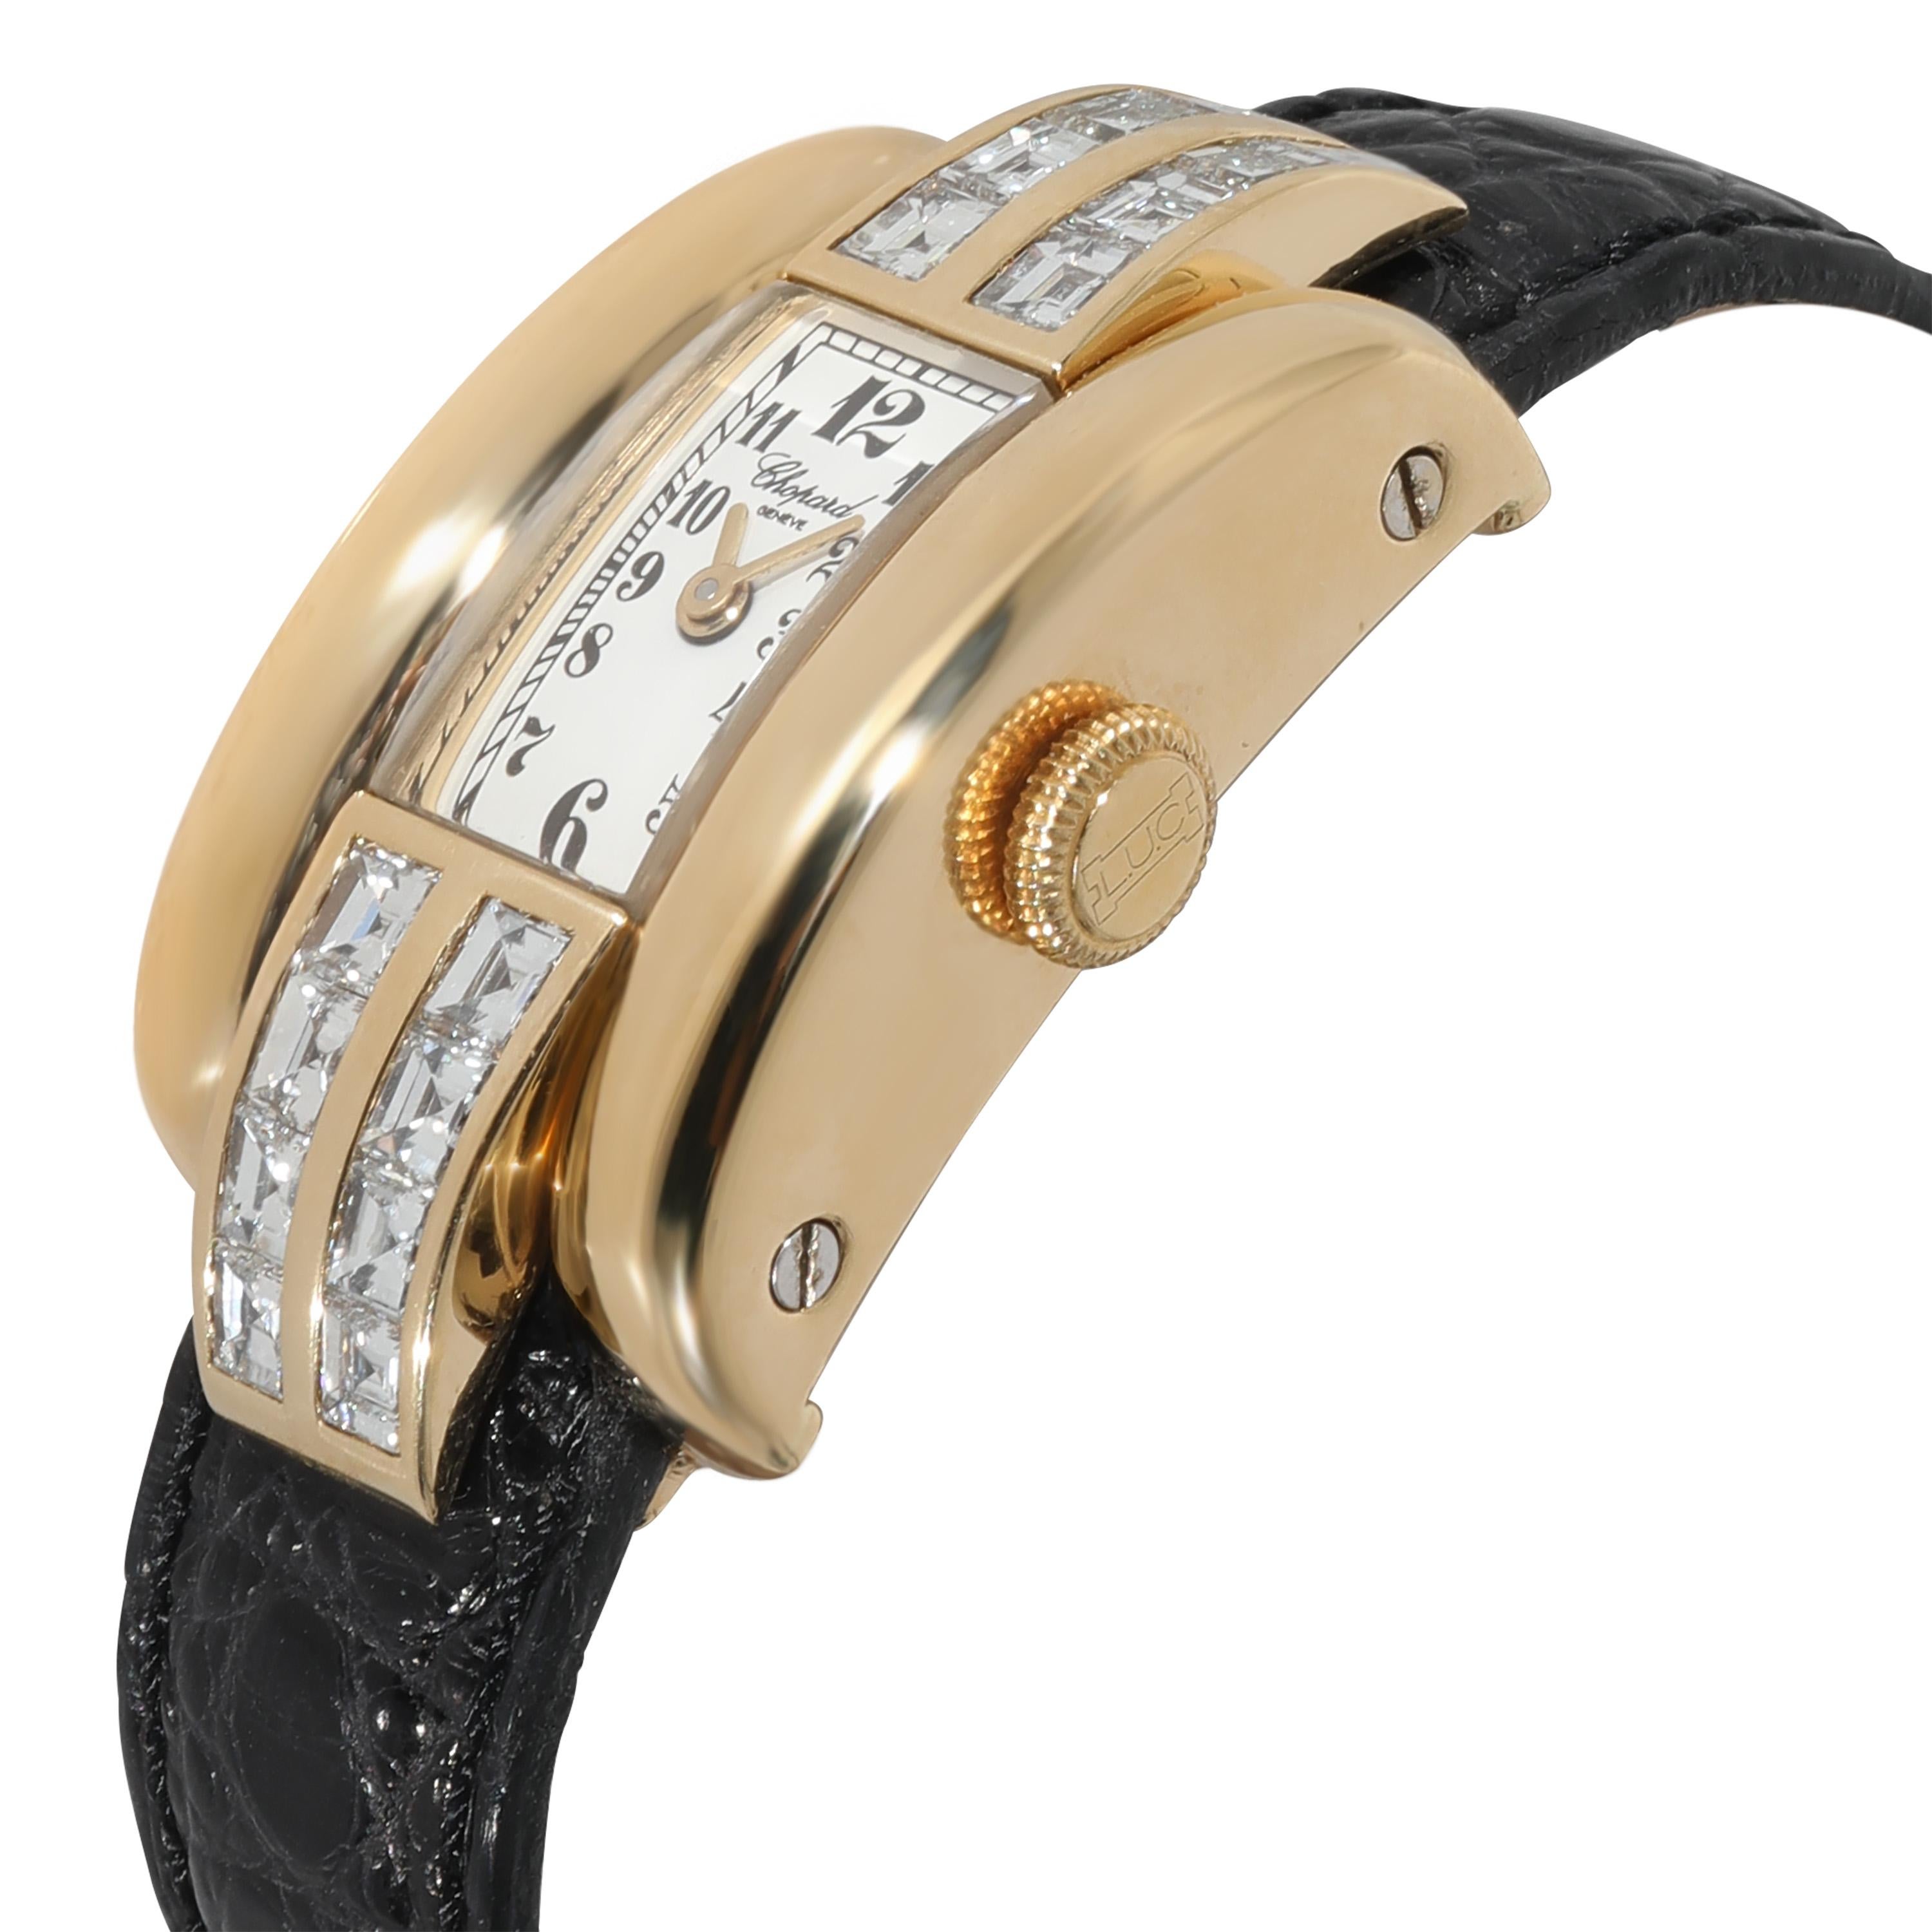 Chopard La Strada 41/6614-20/8 Women's Watch in 18kt Yellow Gold In Excellent Condition For Sale In New York, NY